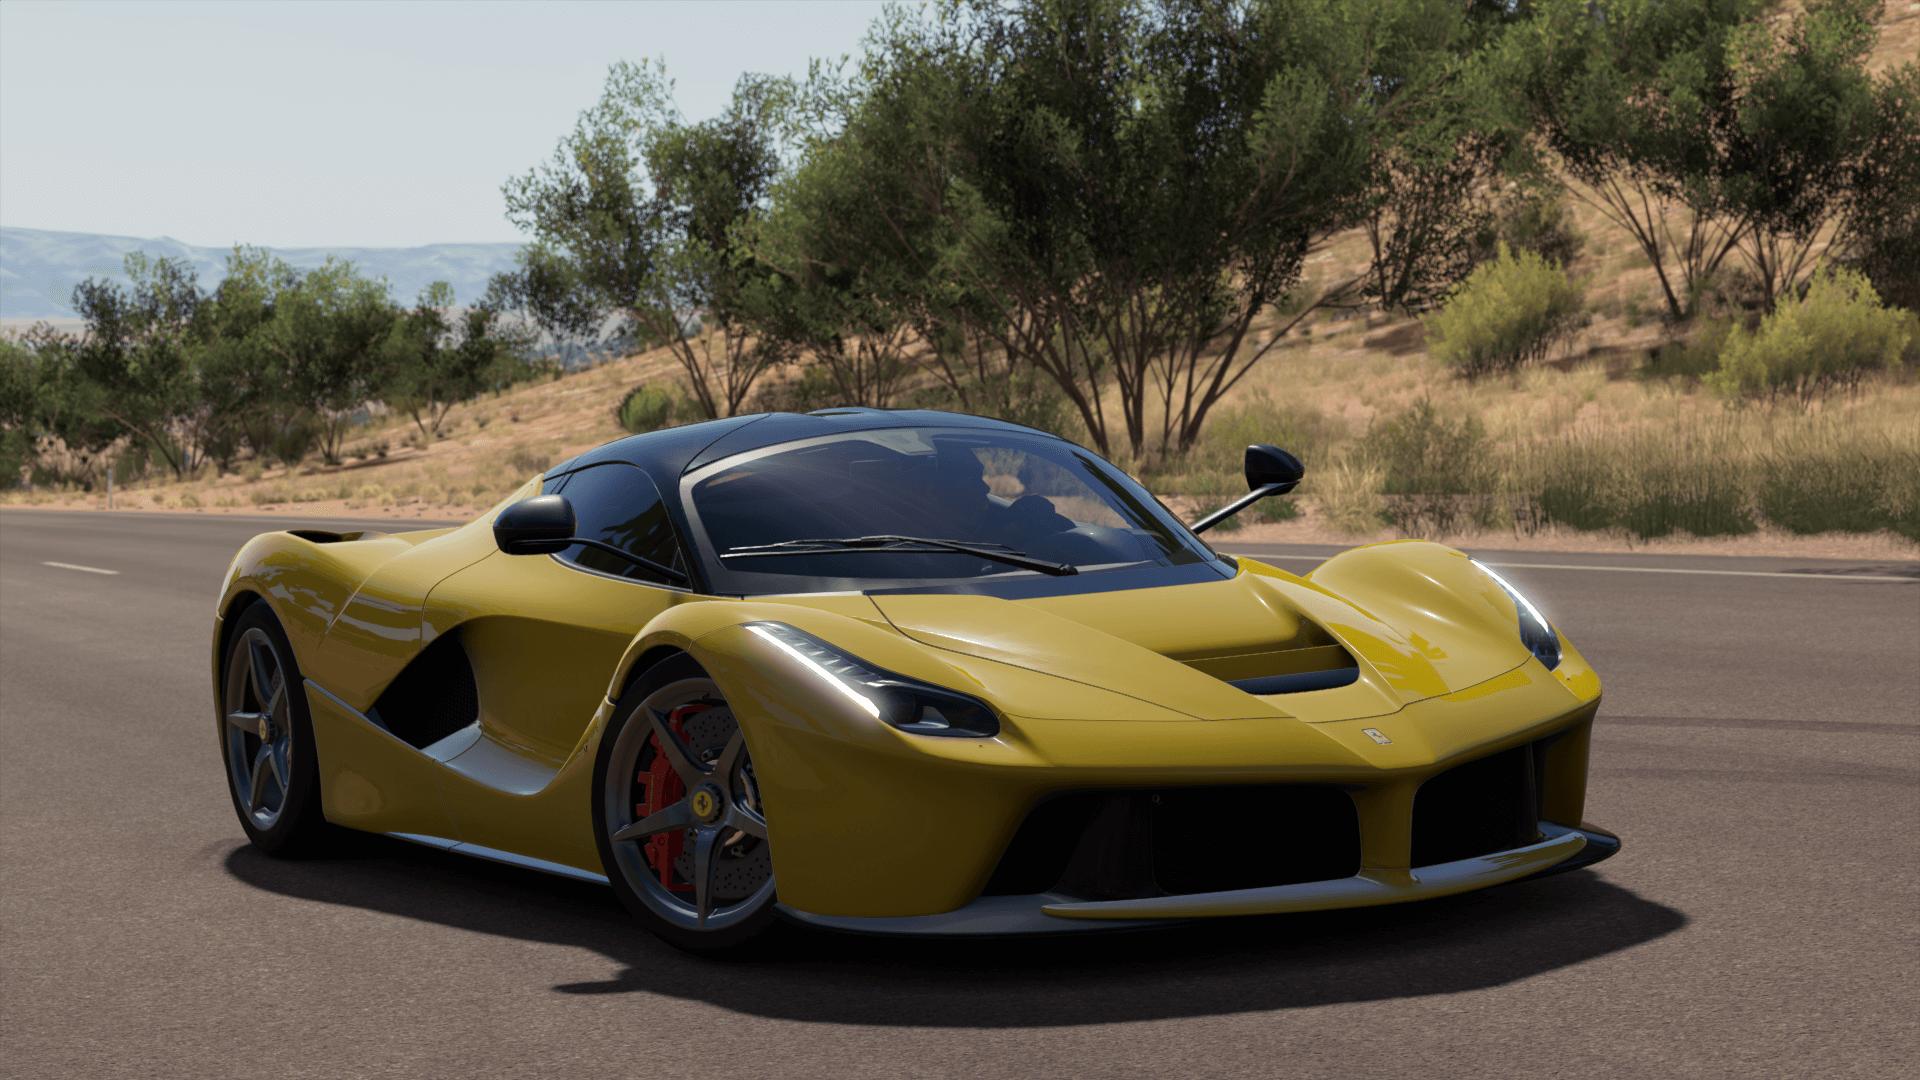 Forza Horizon 3 at Gamescom - FH3 Discussion - Official Forza Community  Forums